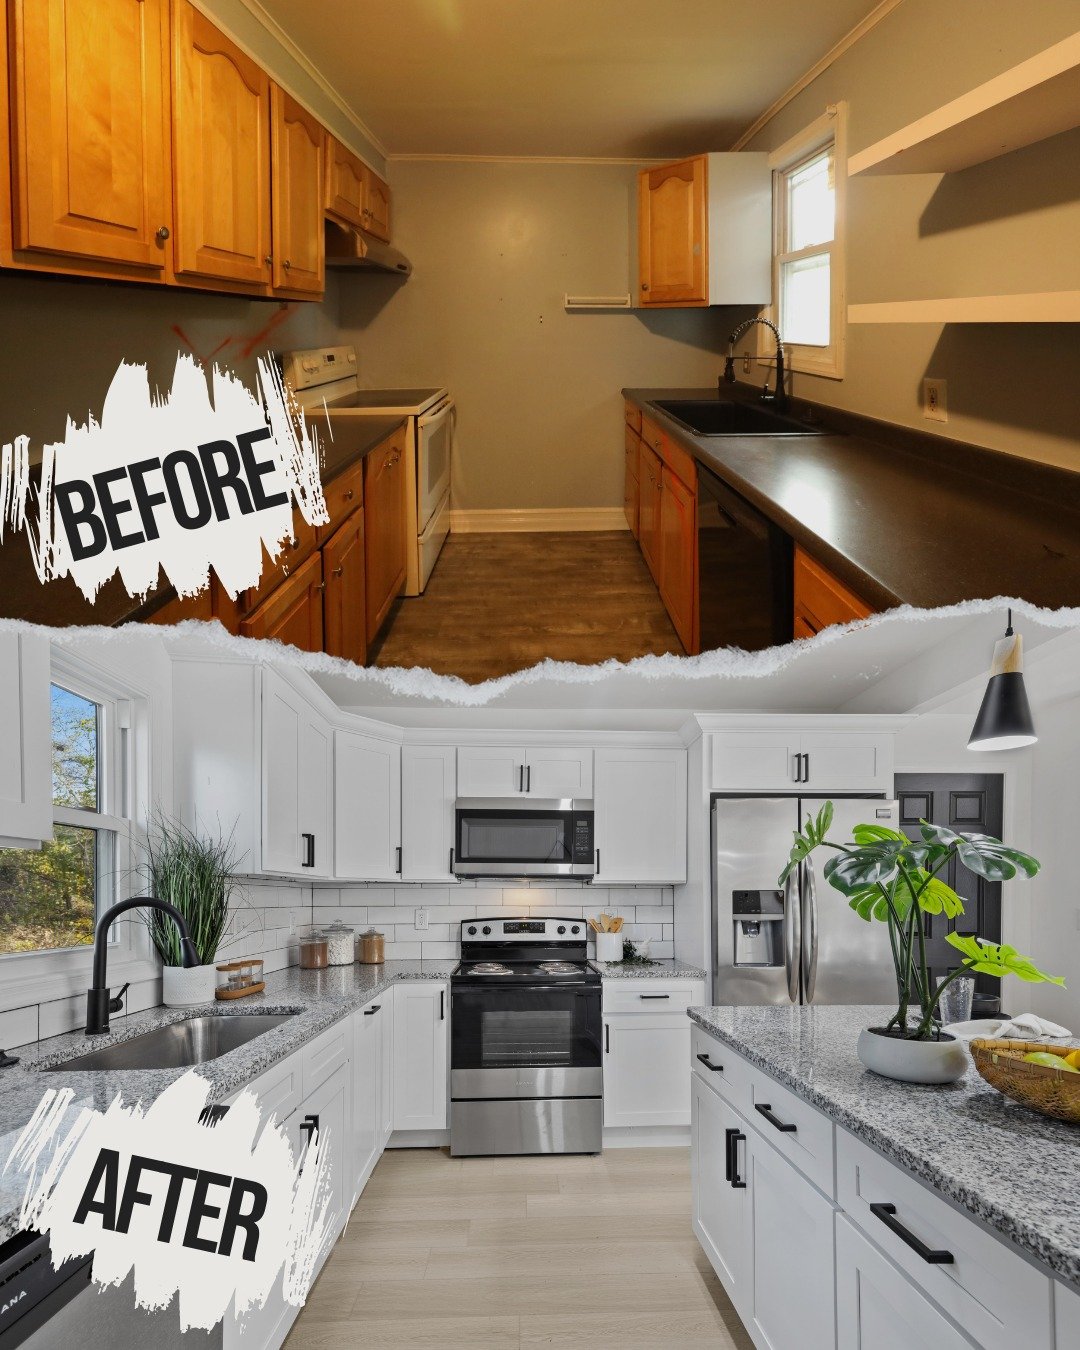 From ordinary to extraordinary! Witness the incredible before-and-after transformation. 🌟

Follow Us:
📞 Call Us: 443-833-4099
🌐 www.randgremodeling.com

#BeforeAfter #TransformationTuesday #Remodeling #HomeRenovation #InteriorDesign #DreamHome #In